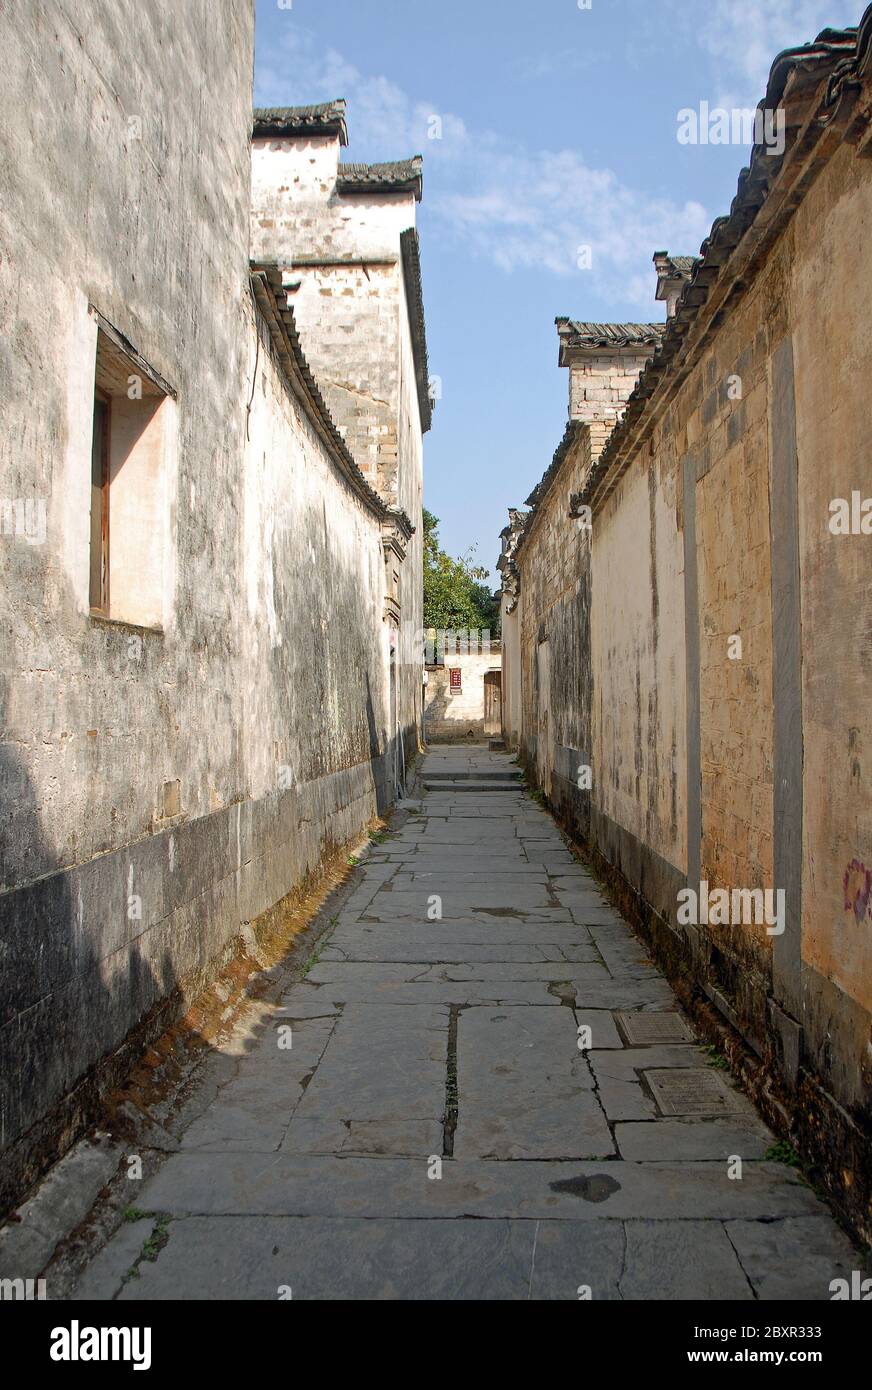 Xidi Ancient Town in Anhui Province, China. A backstreet in the old town of Xidi with historical buildings and flagstone path Stock Photo